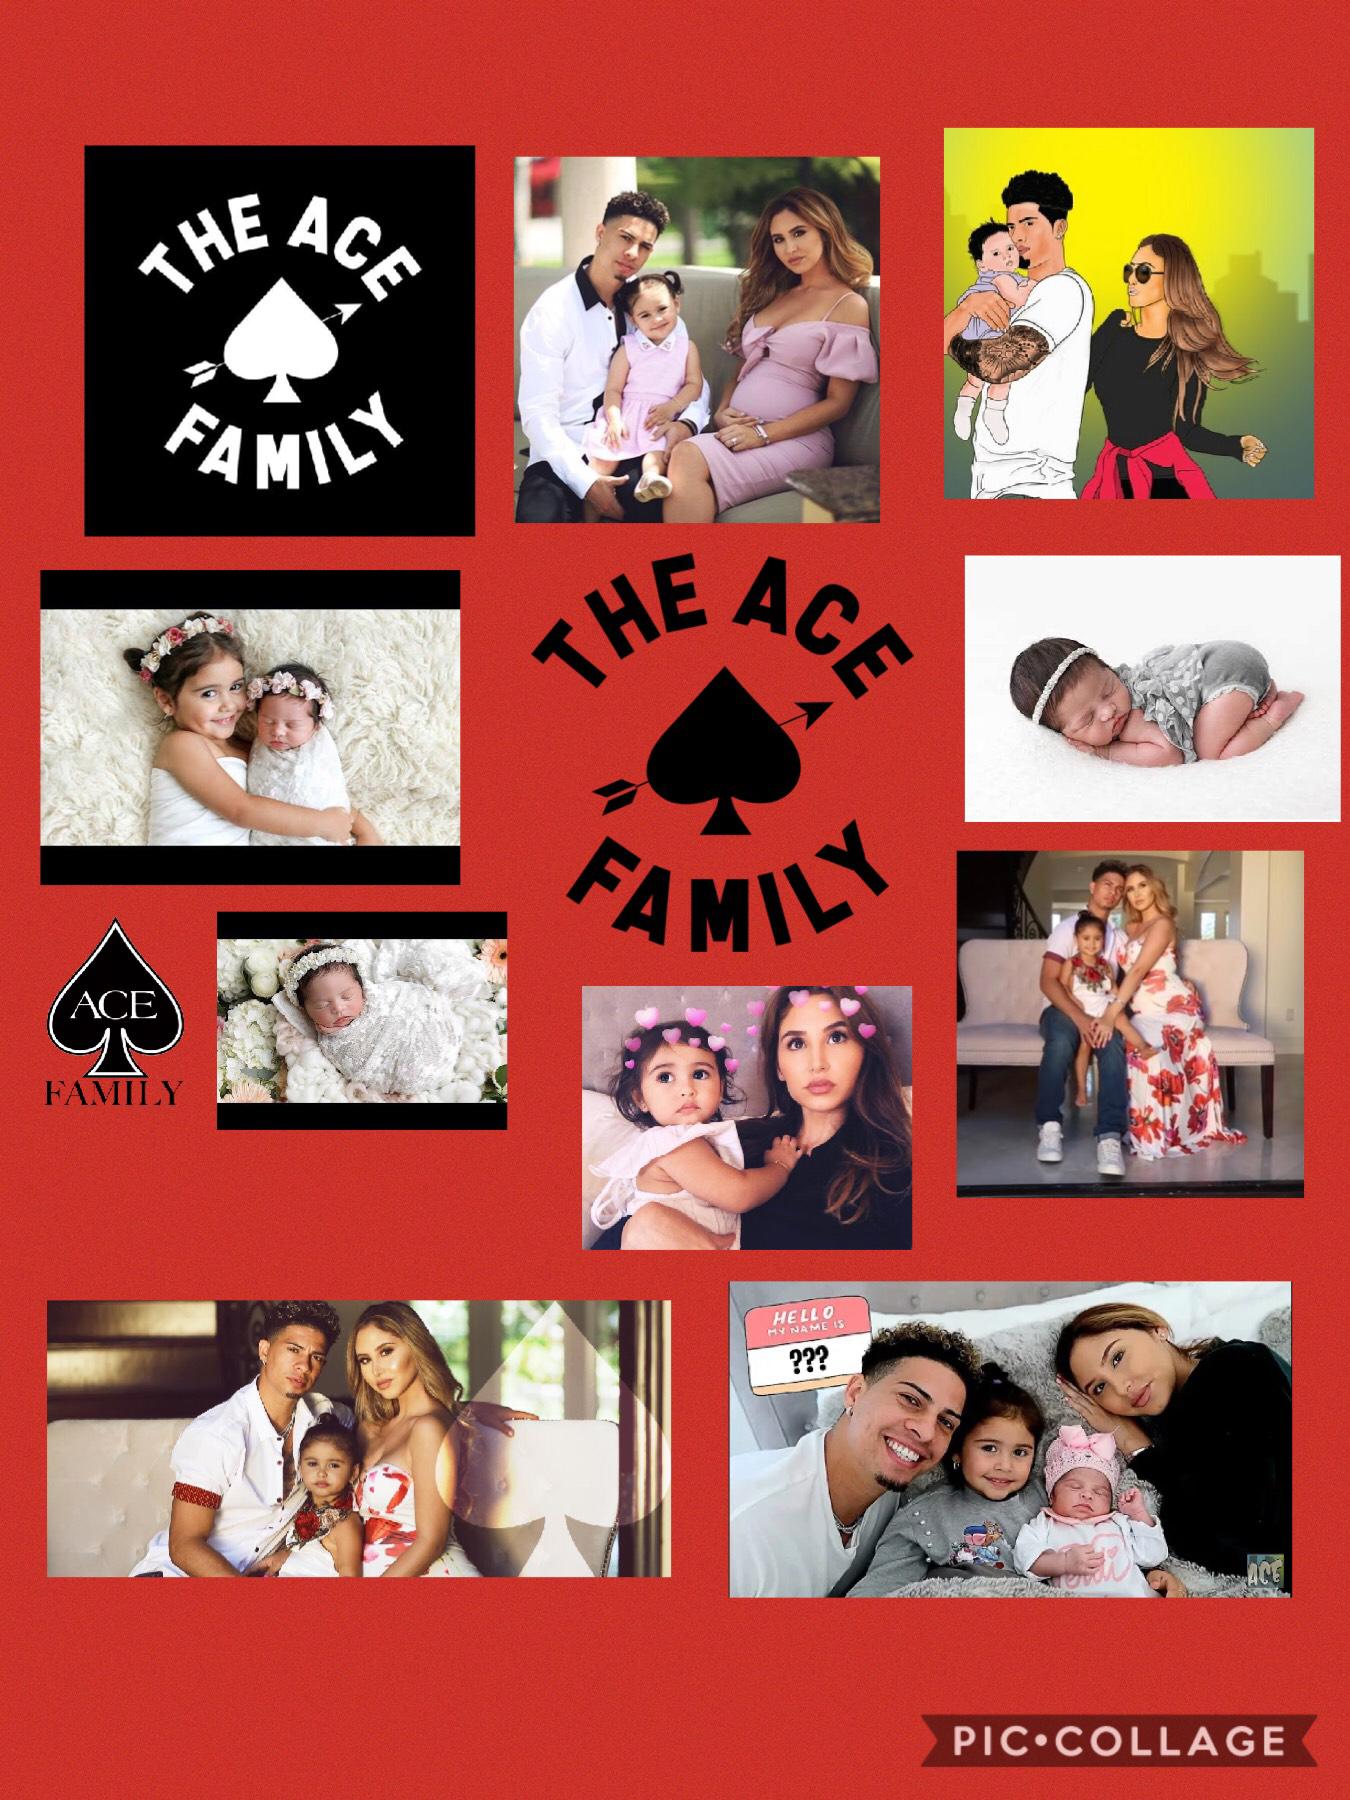 The ace family
